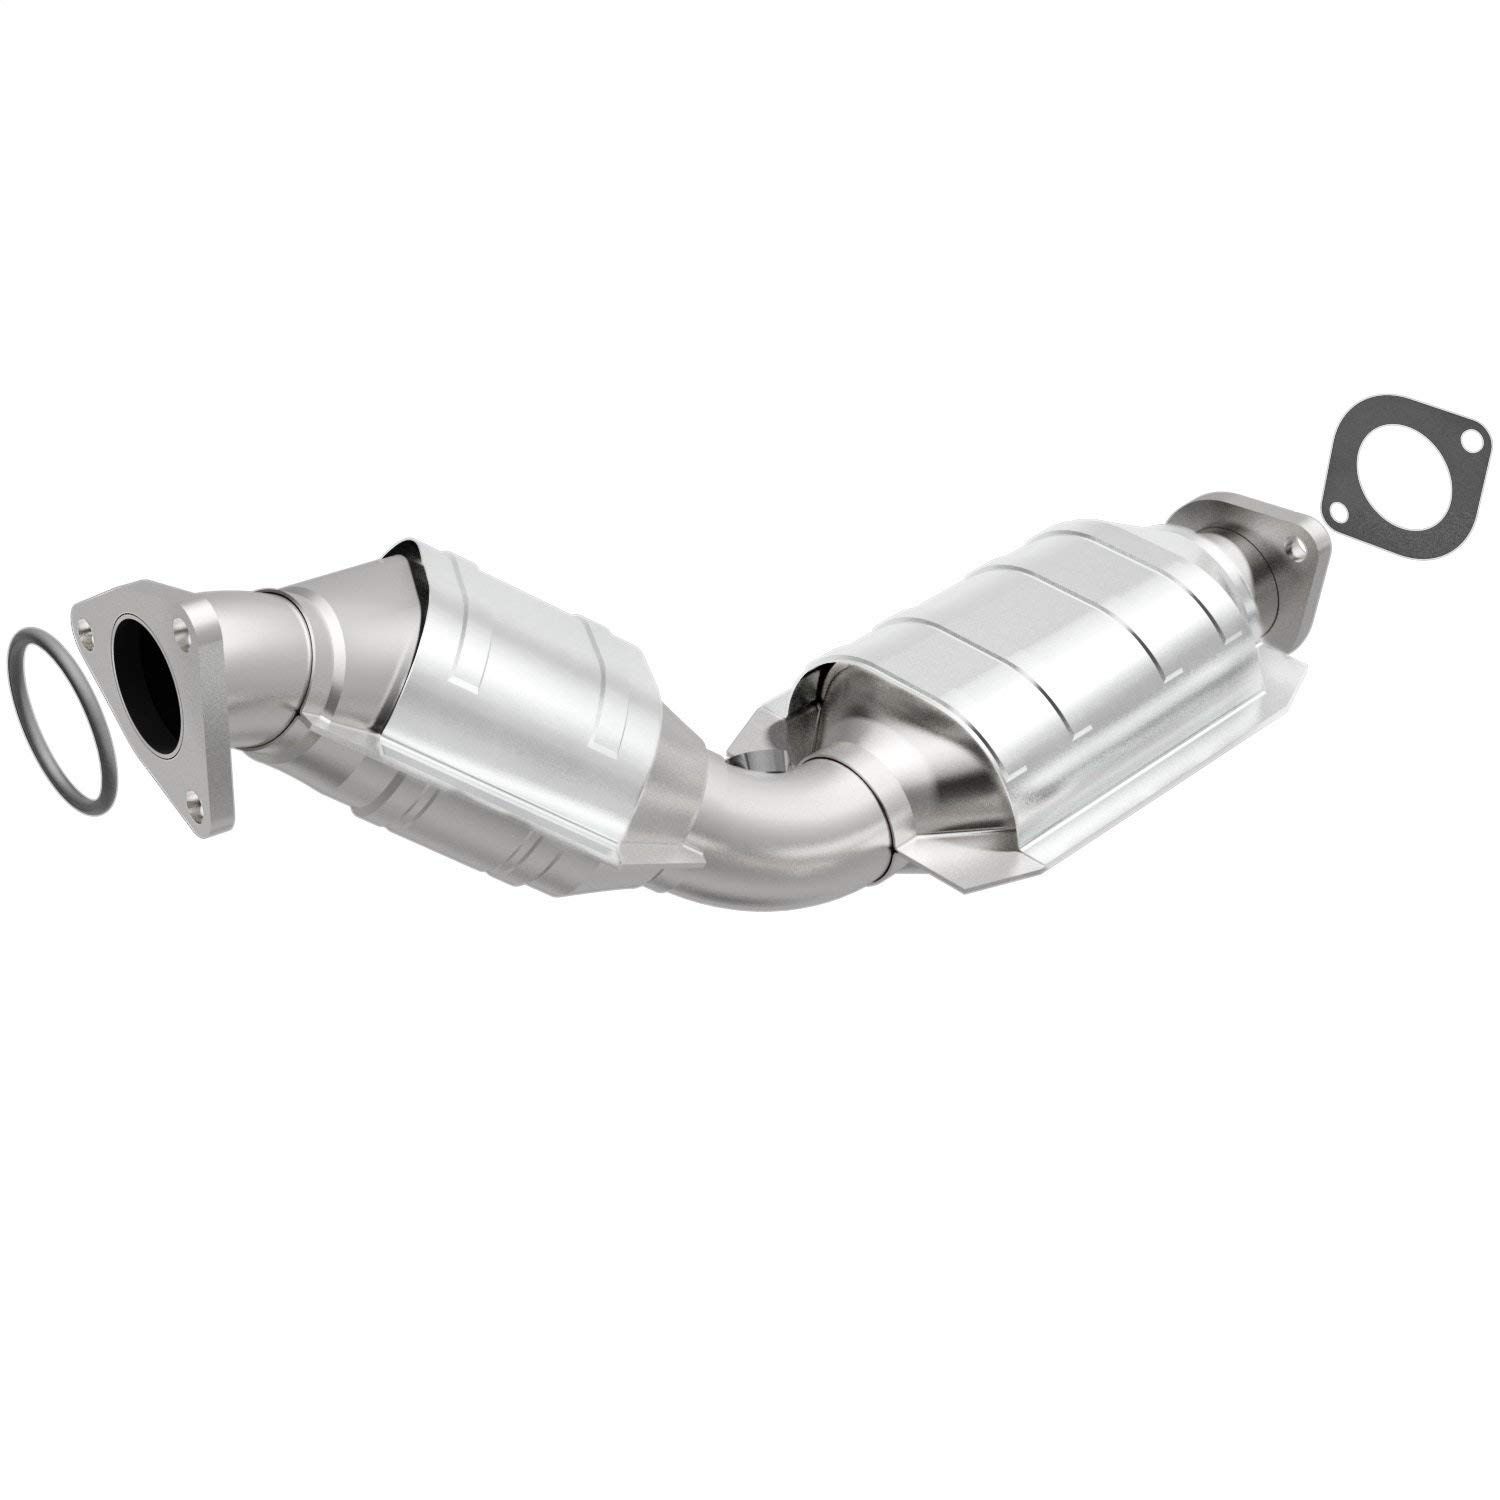 Magnaflow Direct-Fit Catalytic Converter, LH Federal Non-CARB - Nissan 350Z / Infiniti G35